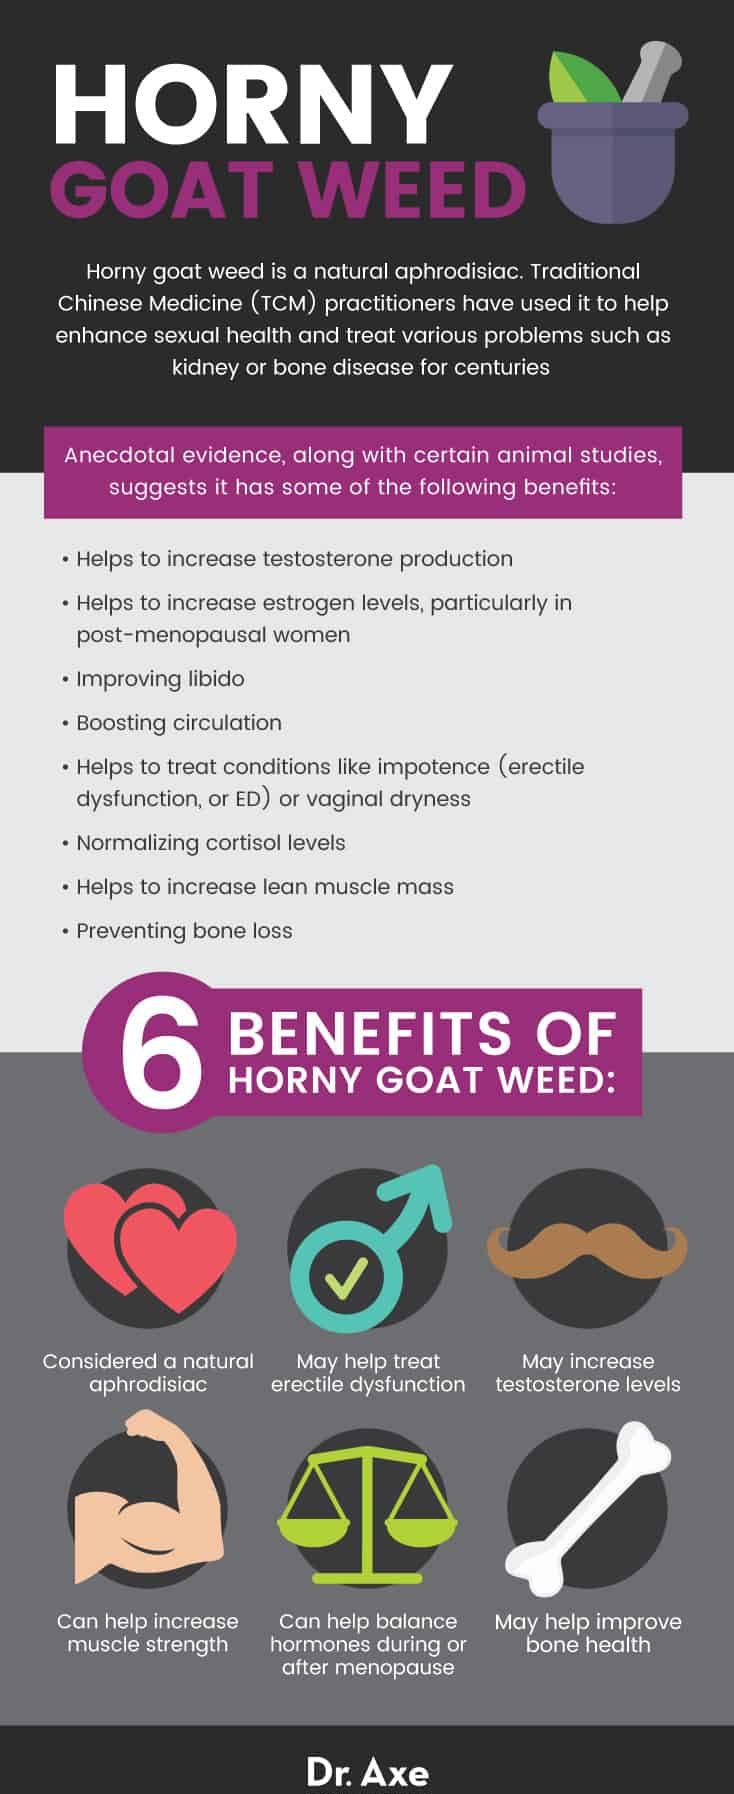 6 benefits of horny goat weed - Dr. Axe